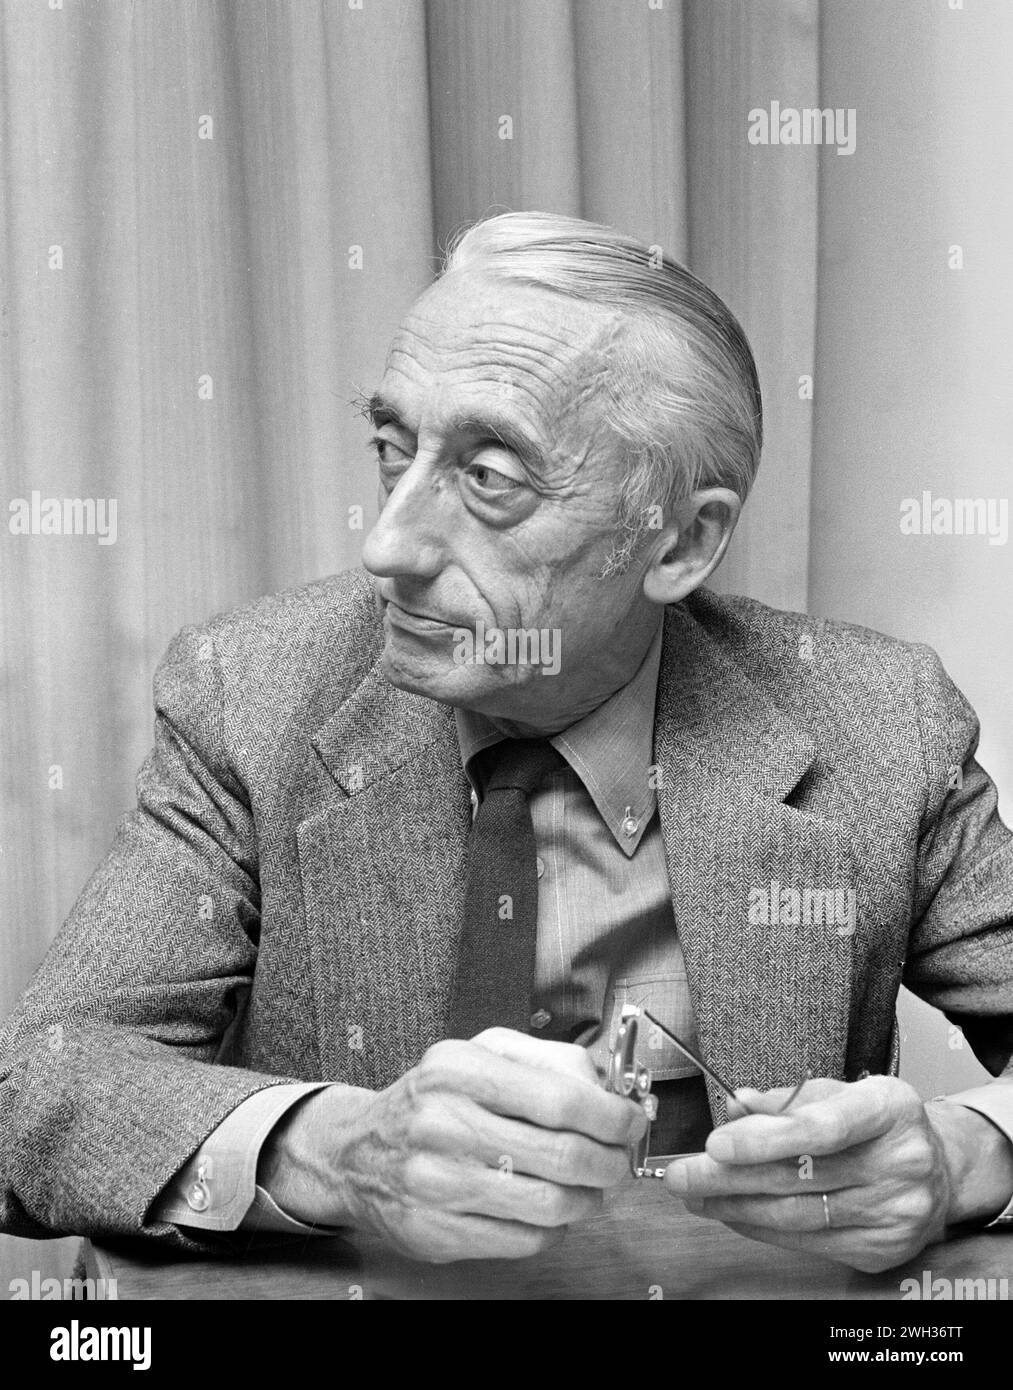 Jacques Cousteau. Portrait of the French oceanographer Jacques-Yves Cousteau (1910-1997) in 1972 Stock Photo